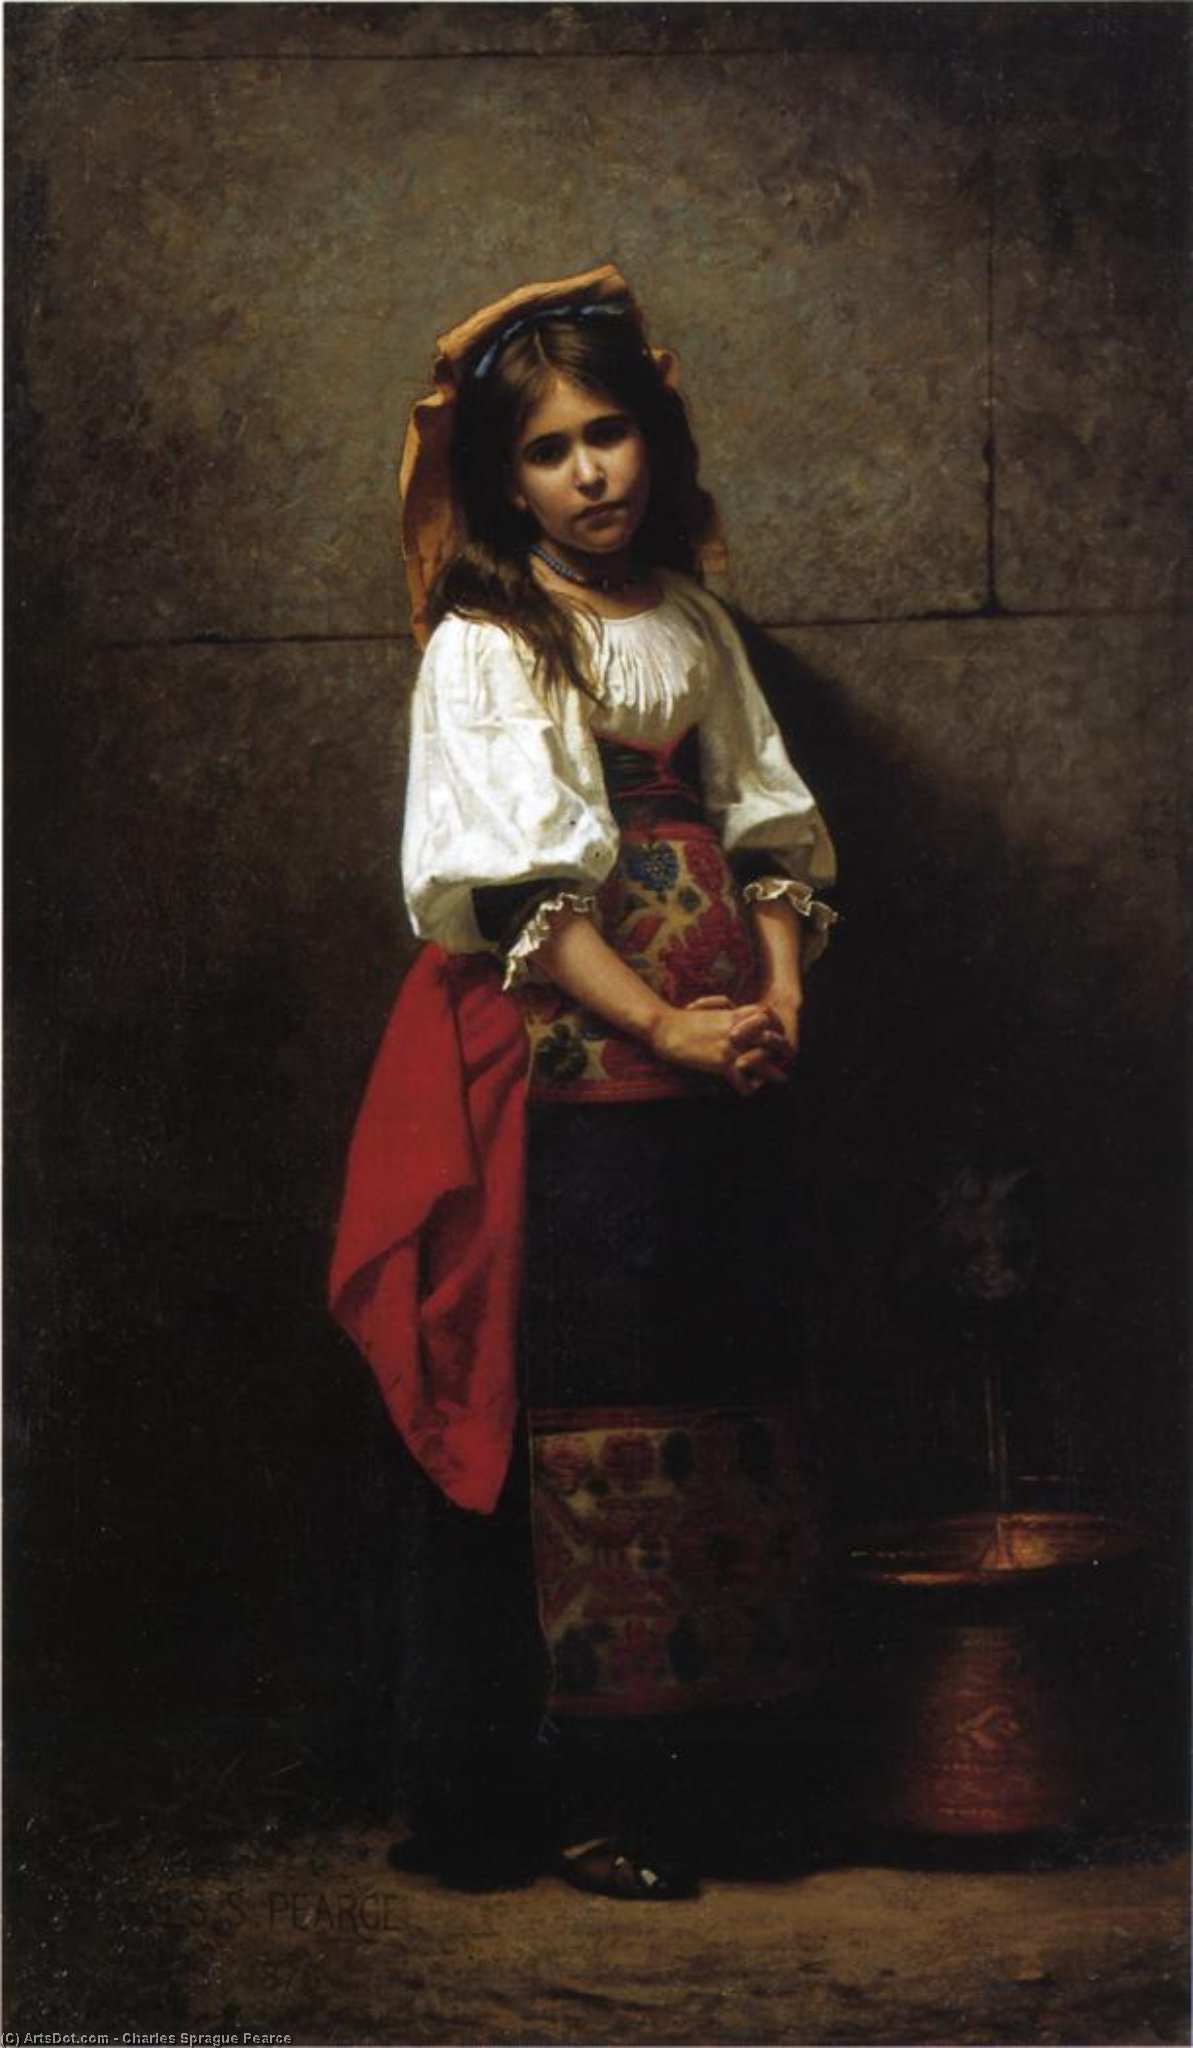 WikiOO.org - Encyclopedia of Fine Arts - Malba, Artwork Charles Sprague Pearce - L'Italienne (also known as At the Fountain)